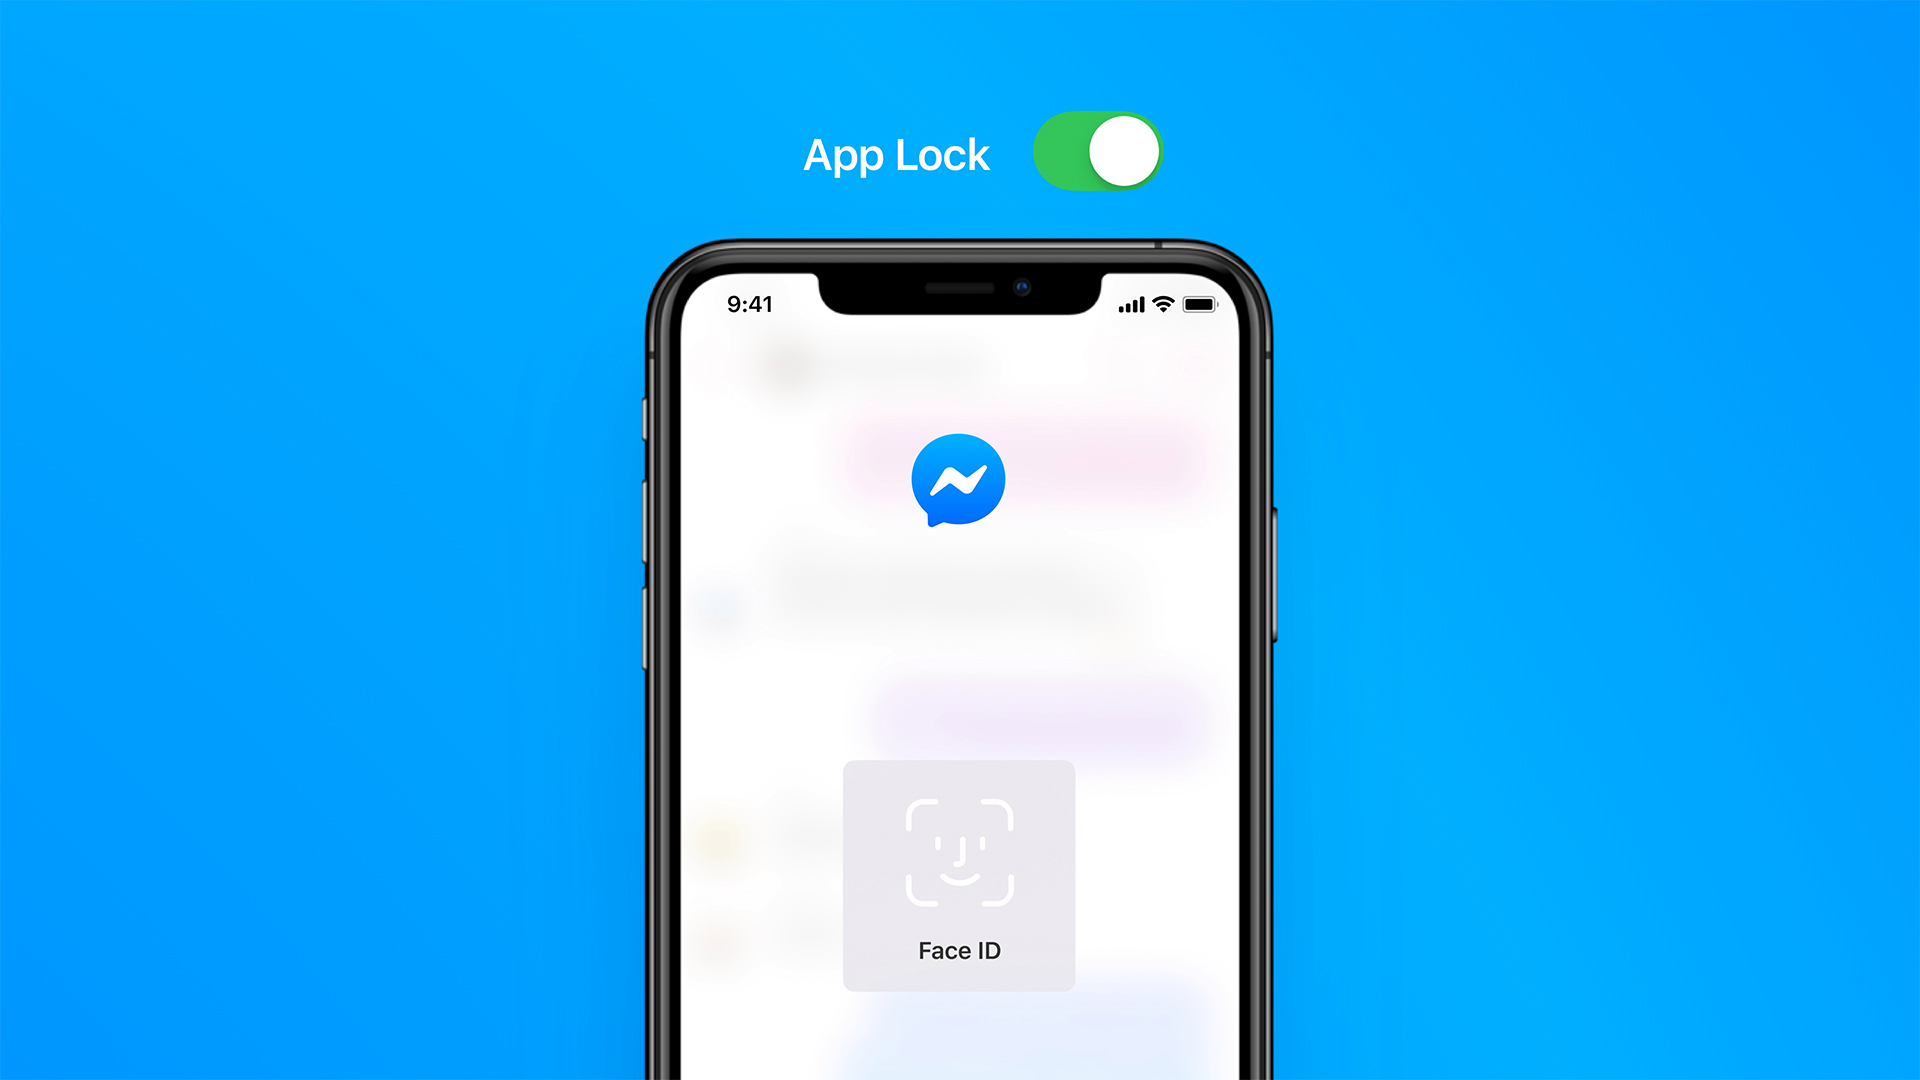 Facebook Messenger Introduces App Lock and New Privacy Settings NRP-Messenger_Introduces_App_Lock_Privacy_Settings-banner_FINAL.jpg